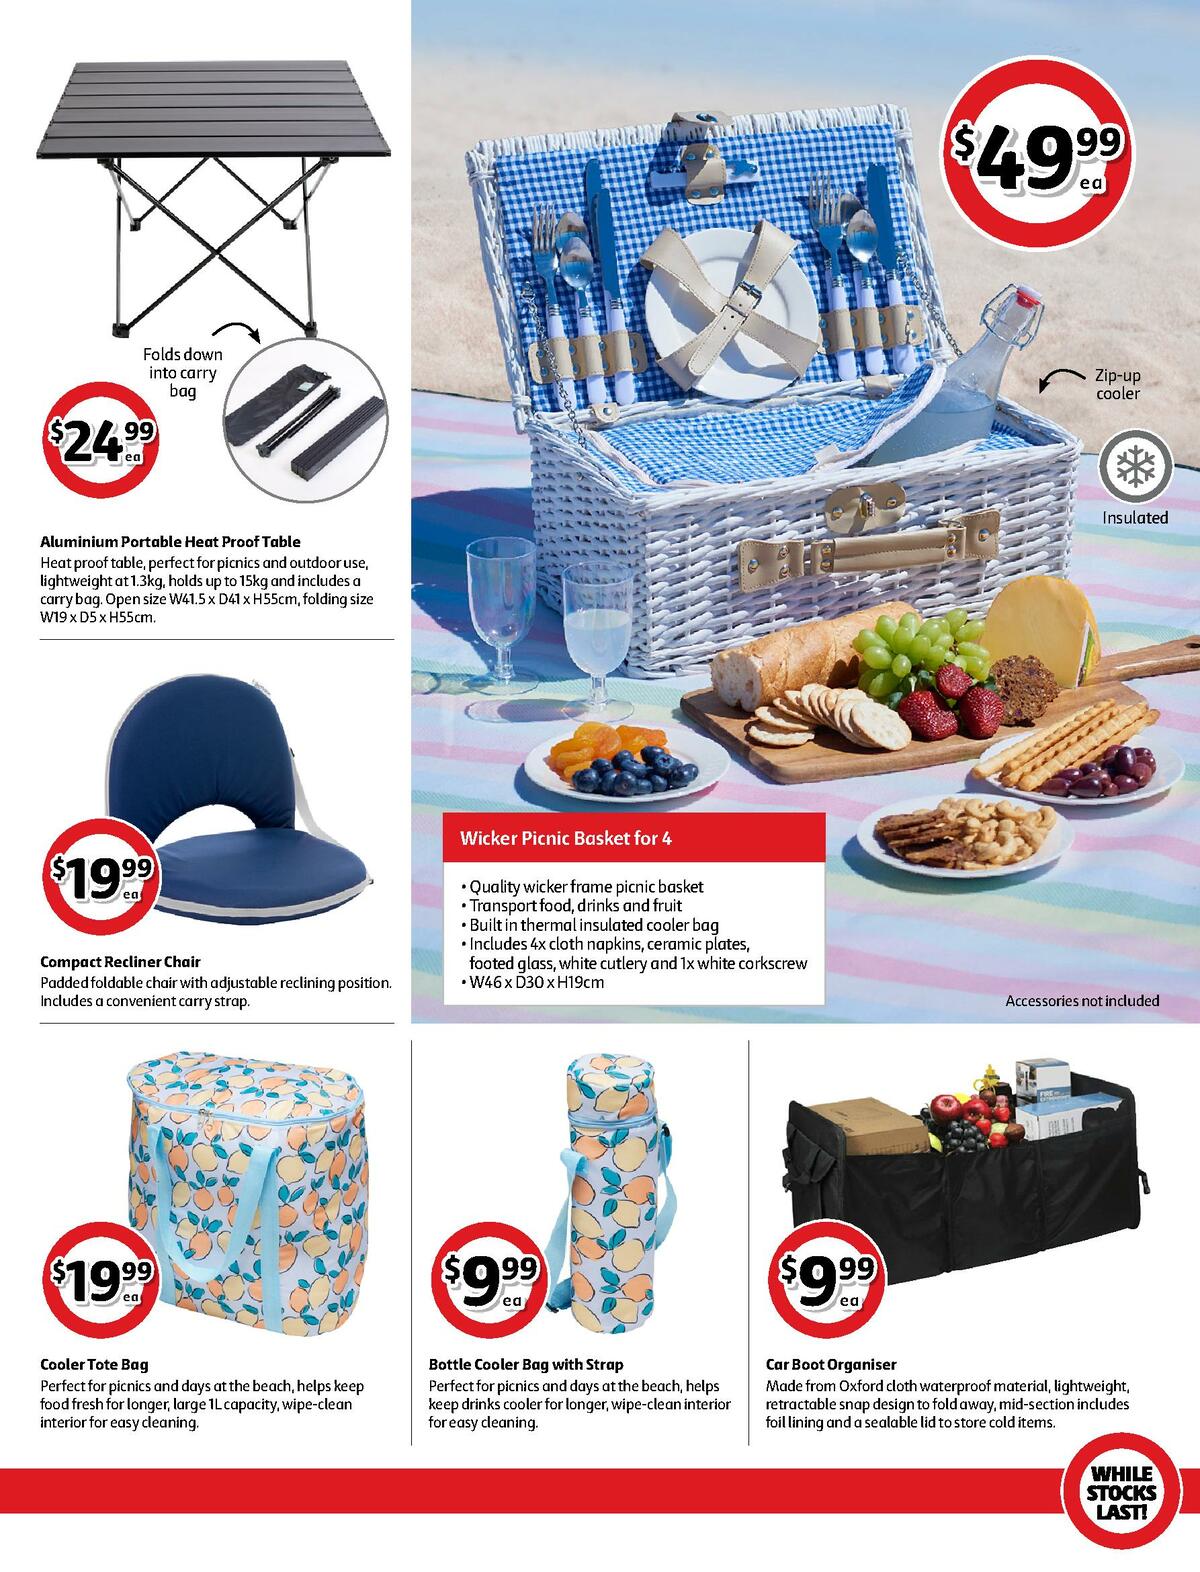 Coles Best Buys - Ready to get away Catalogues from 5 November